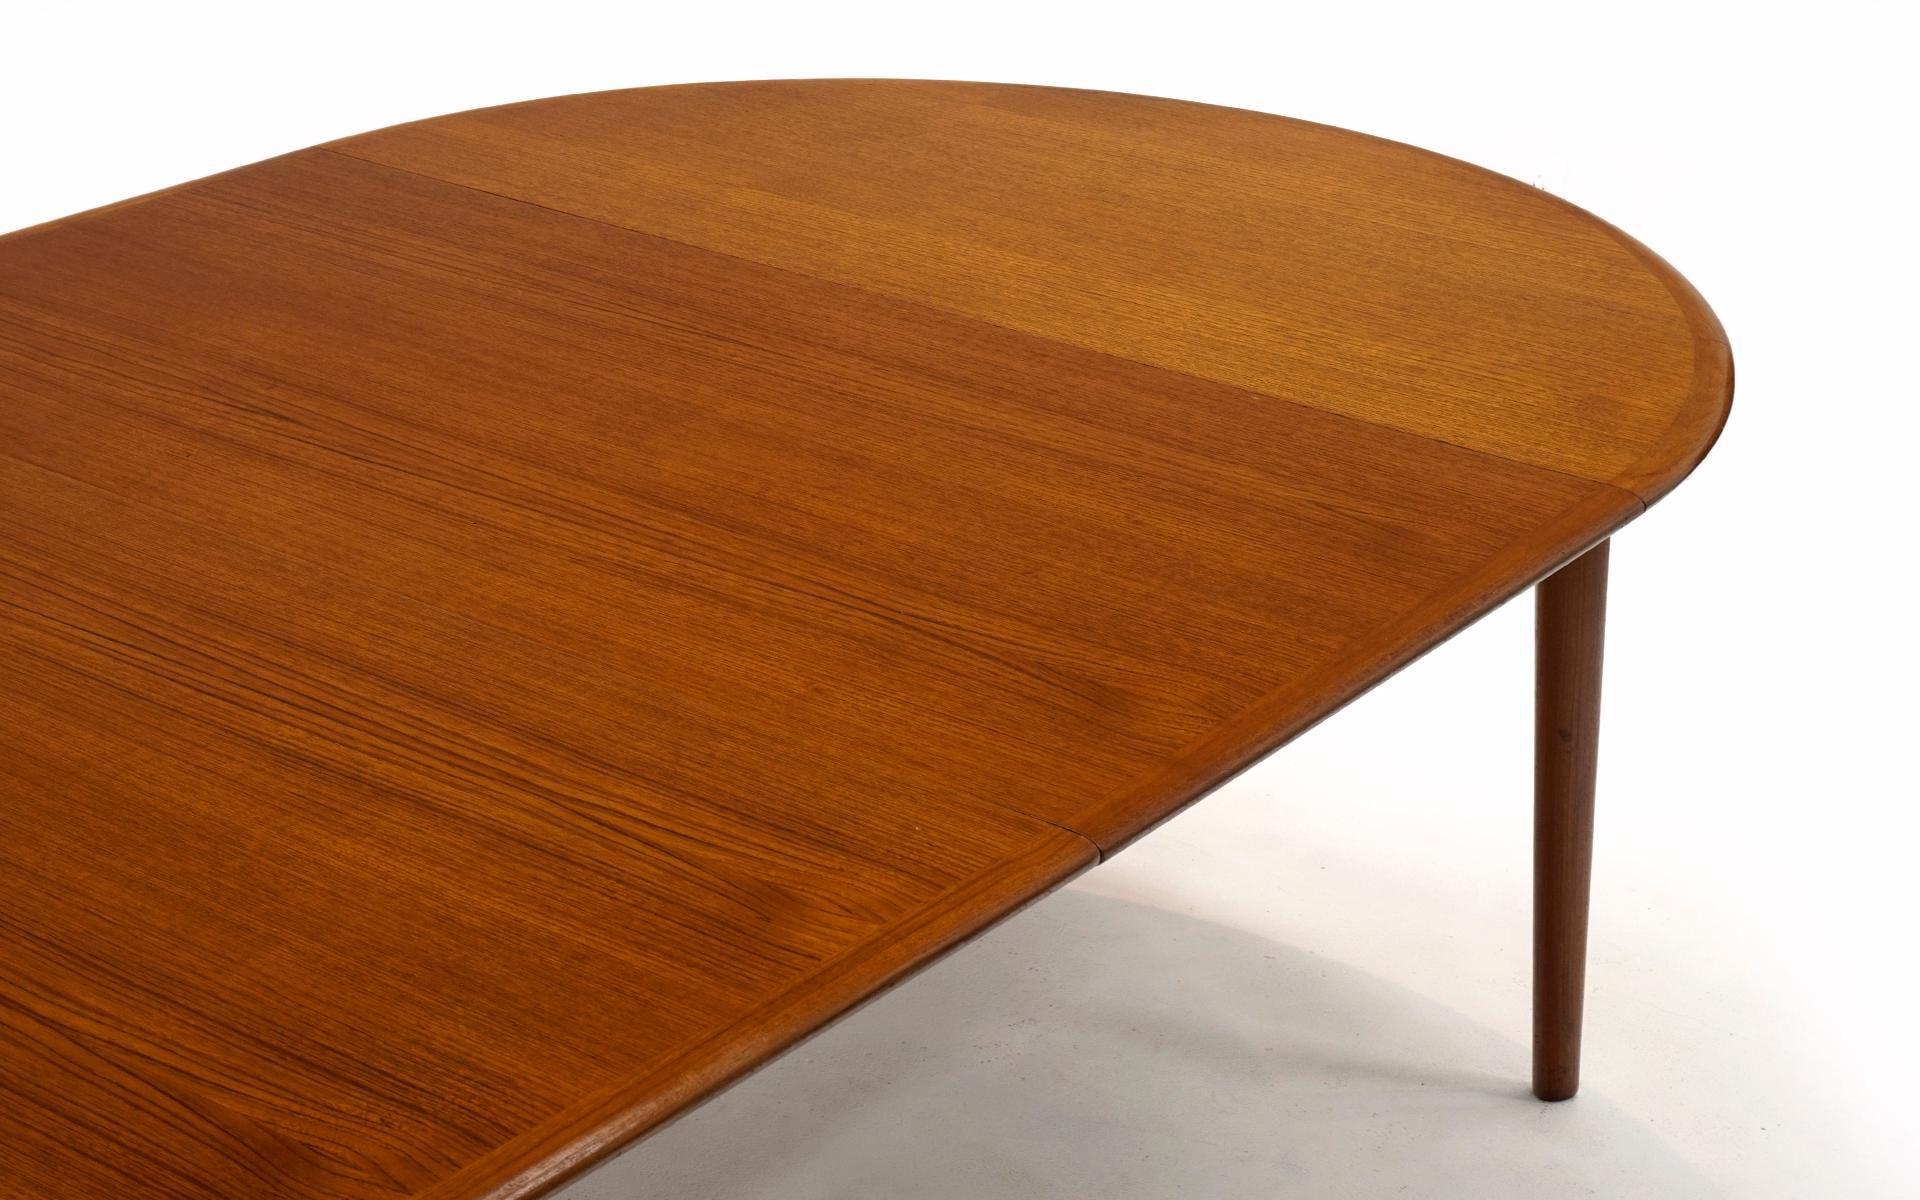 Mid-20th Century Round Expandable Danish Modern Teak Dining Table with Two Leaves, 1962, Original